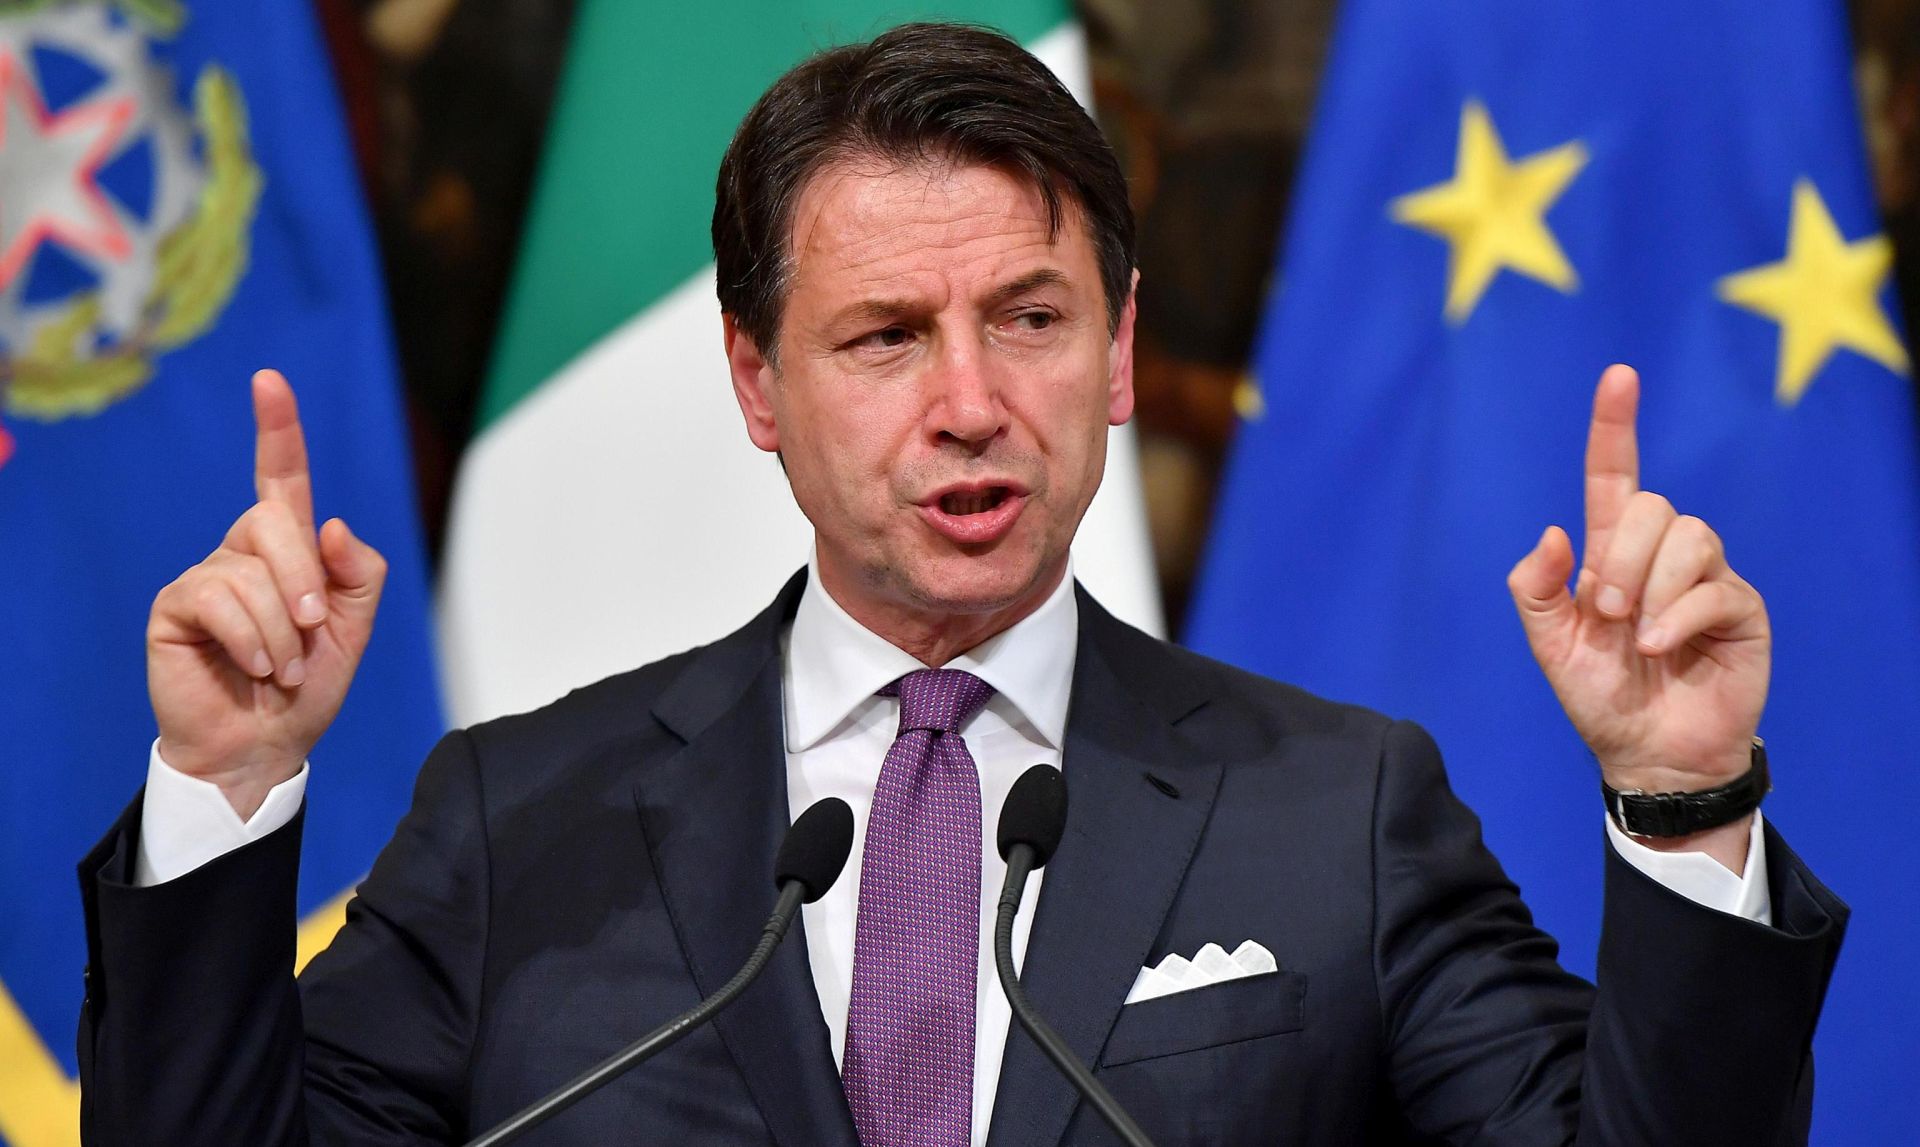 epa07623187 epa07623150 Italian Prime Minister, Giuseppe Conte, holds a press conference at Chili Palace in Rome, Italy, 03 June 2019. Italian media report Conte was expected to make an announcement related to ongoing tensions in the Italian coalition government 
and in particular related with the Five Star Movement and far-right party League.  EPA/ETTORE FERRARI  EPA-EFE/ETTORE FERRARI